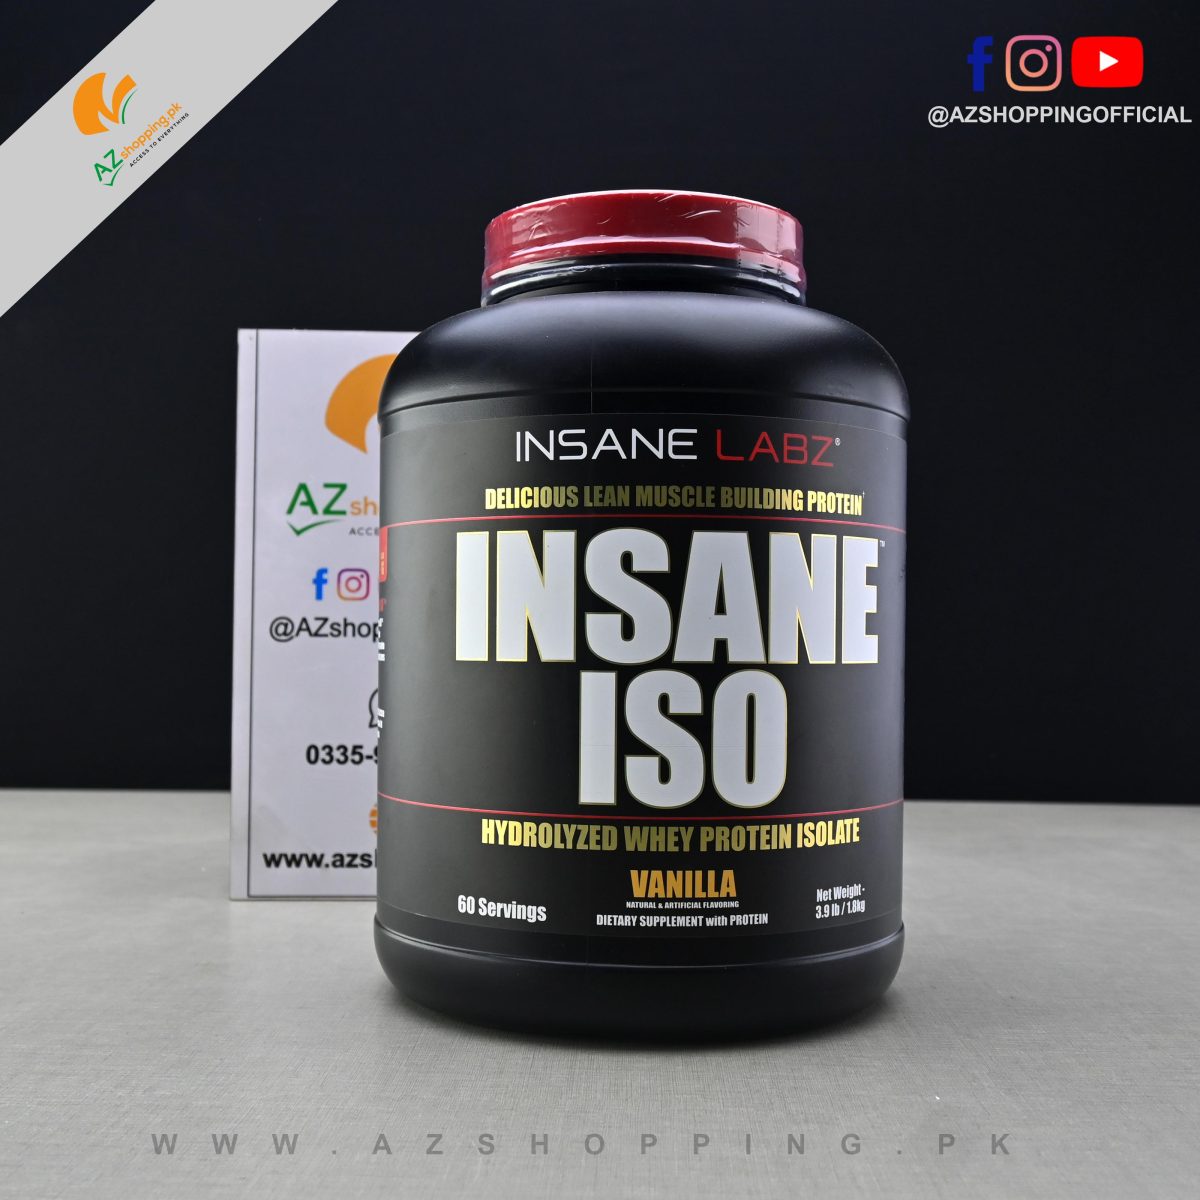 Insane Labz – Insane ISO Hydrolyzed Whey Protein Isolate For Lean Muscle Building - 60 servings – 3.9 Lbs (1.8Kg)